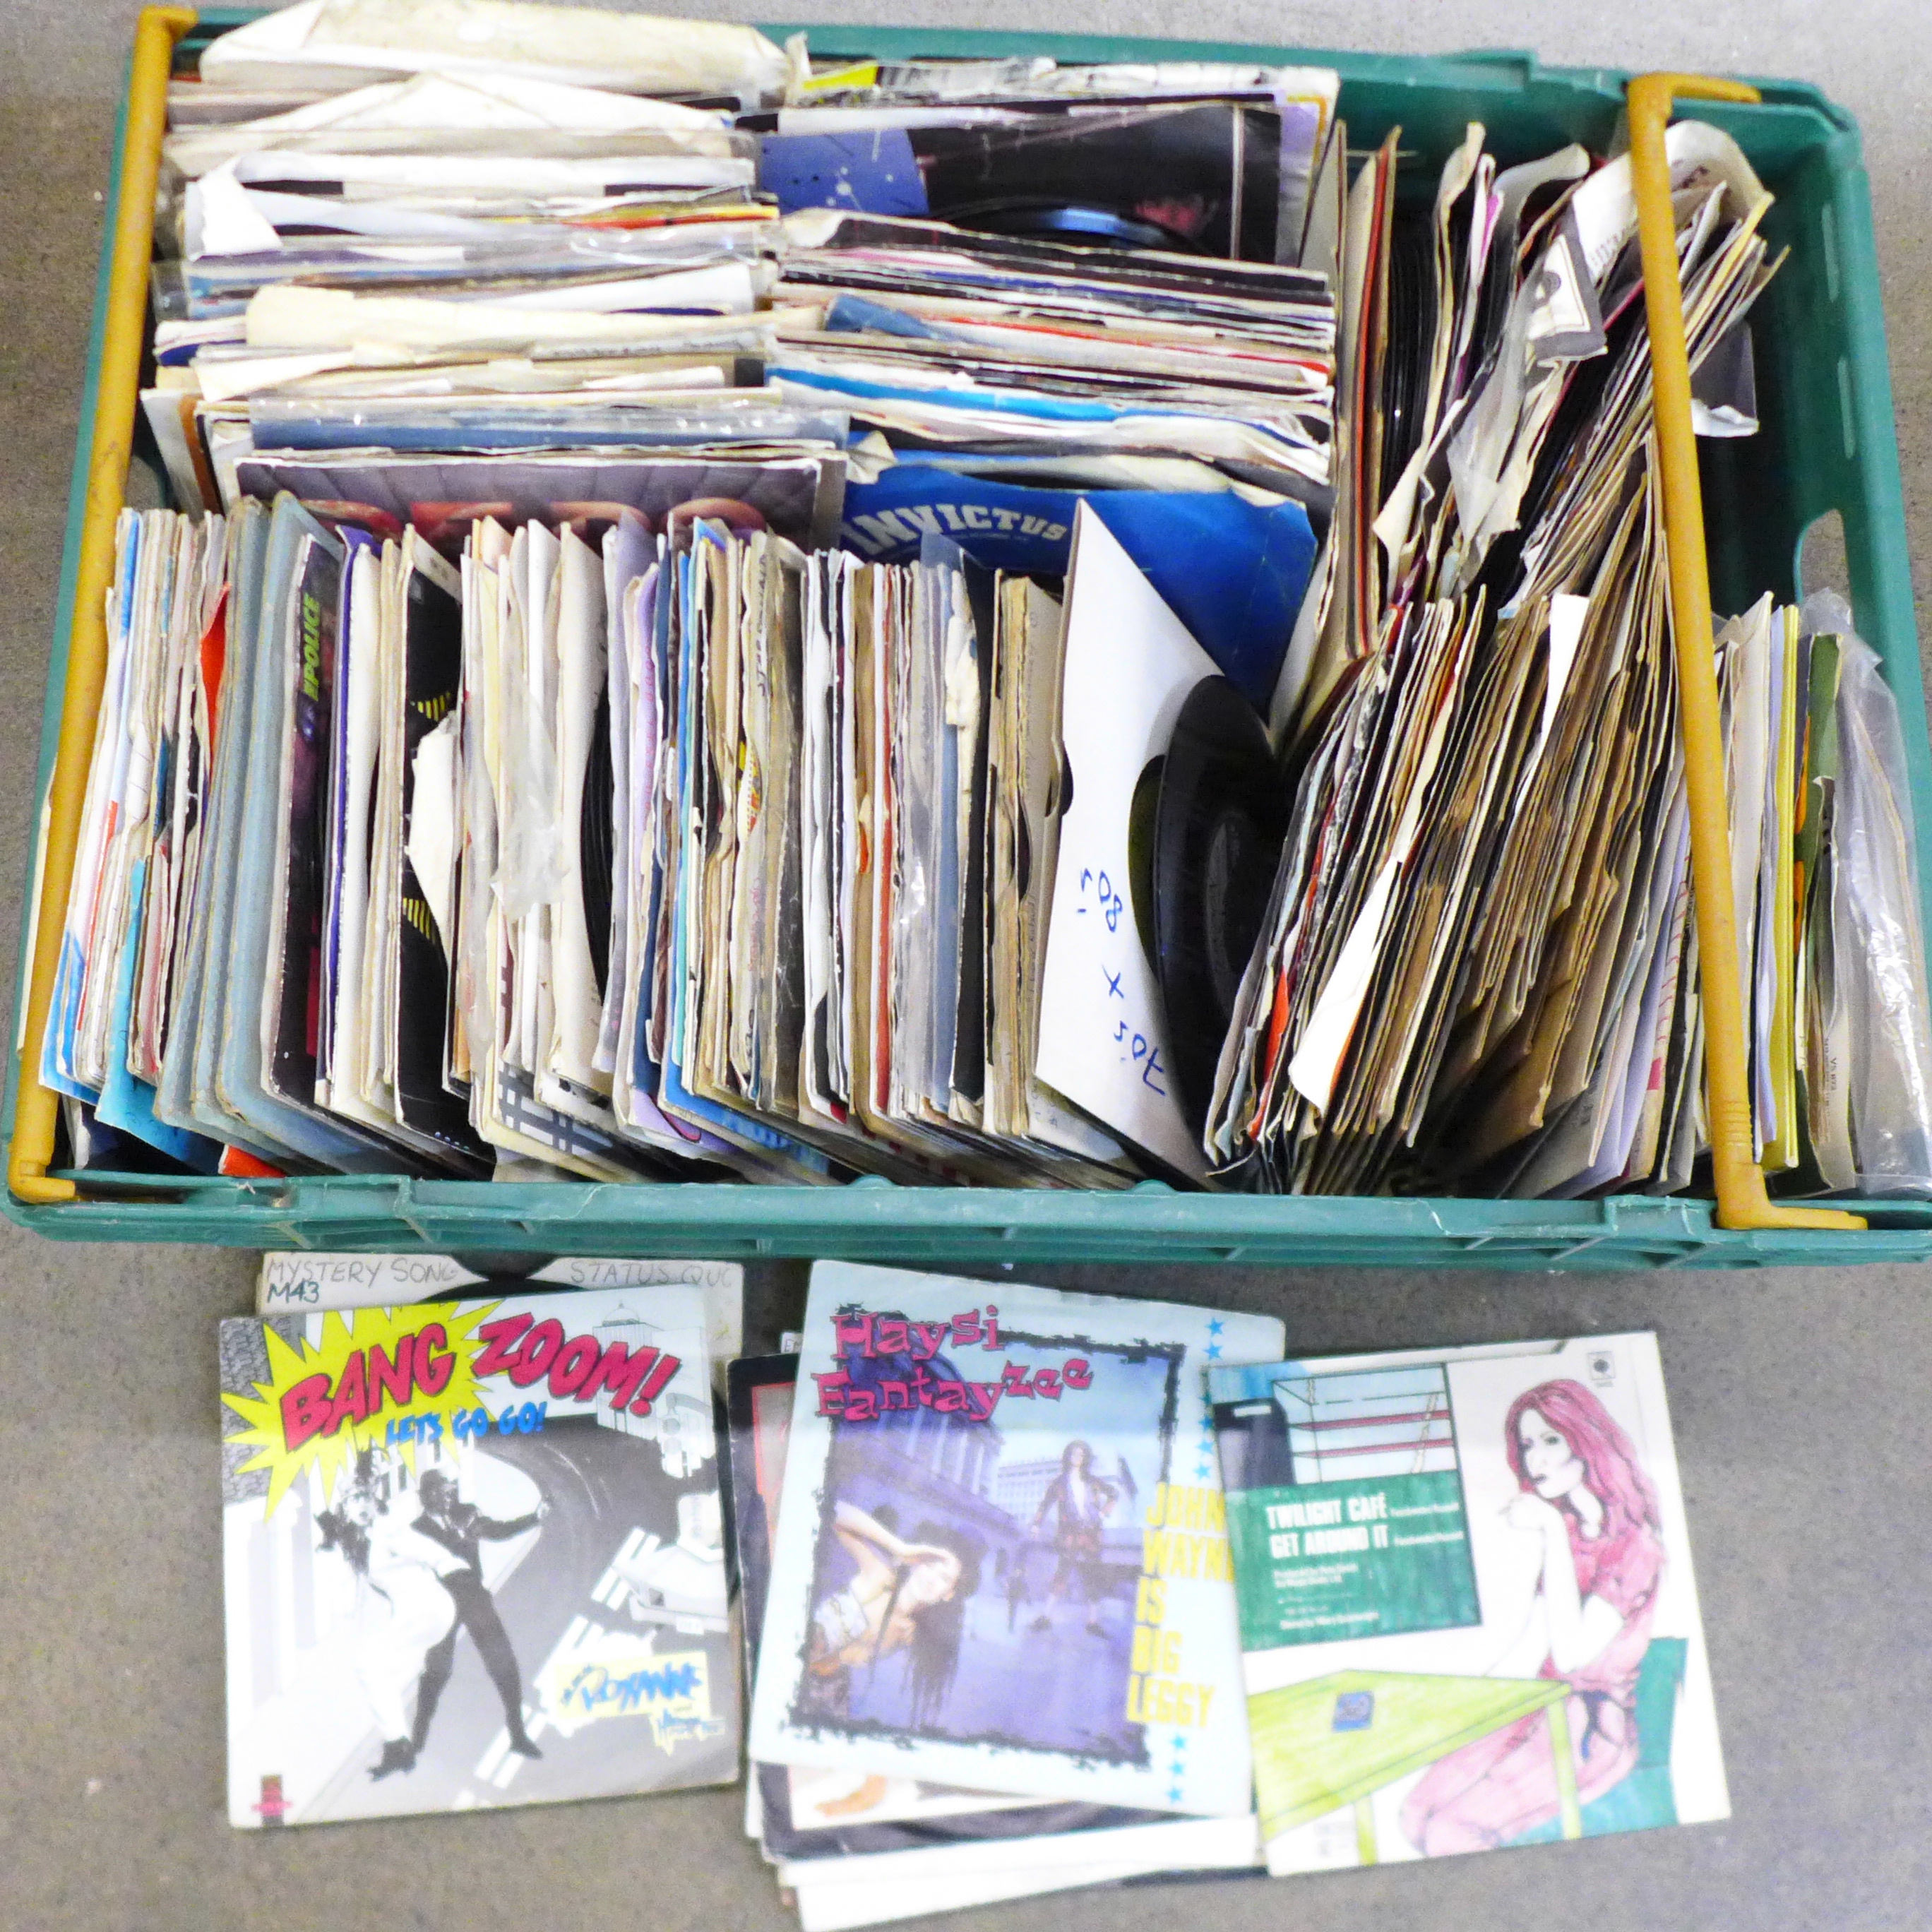 A box of 1960's, 1970's and 1980's, 7" vinyl singles